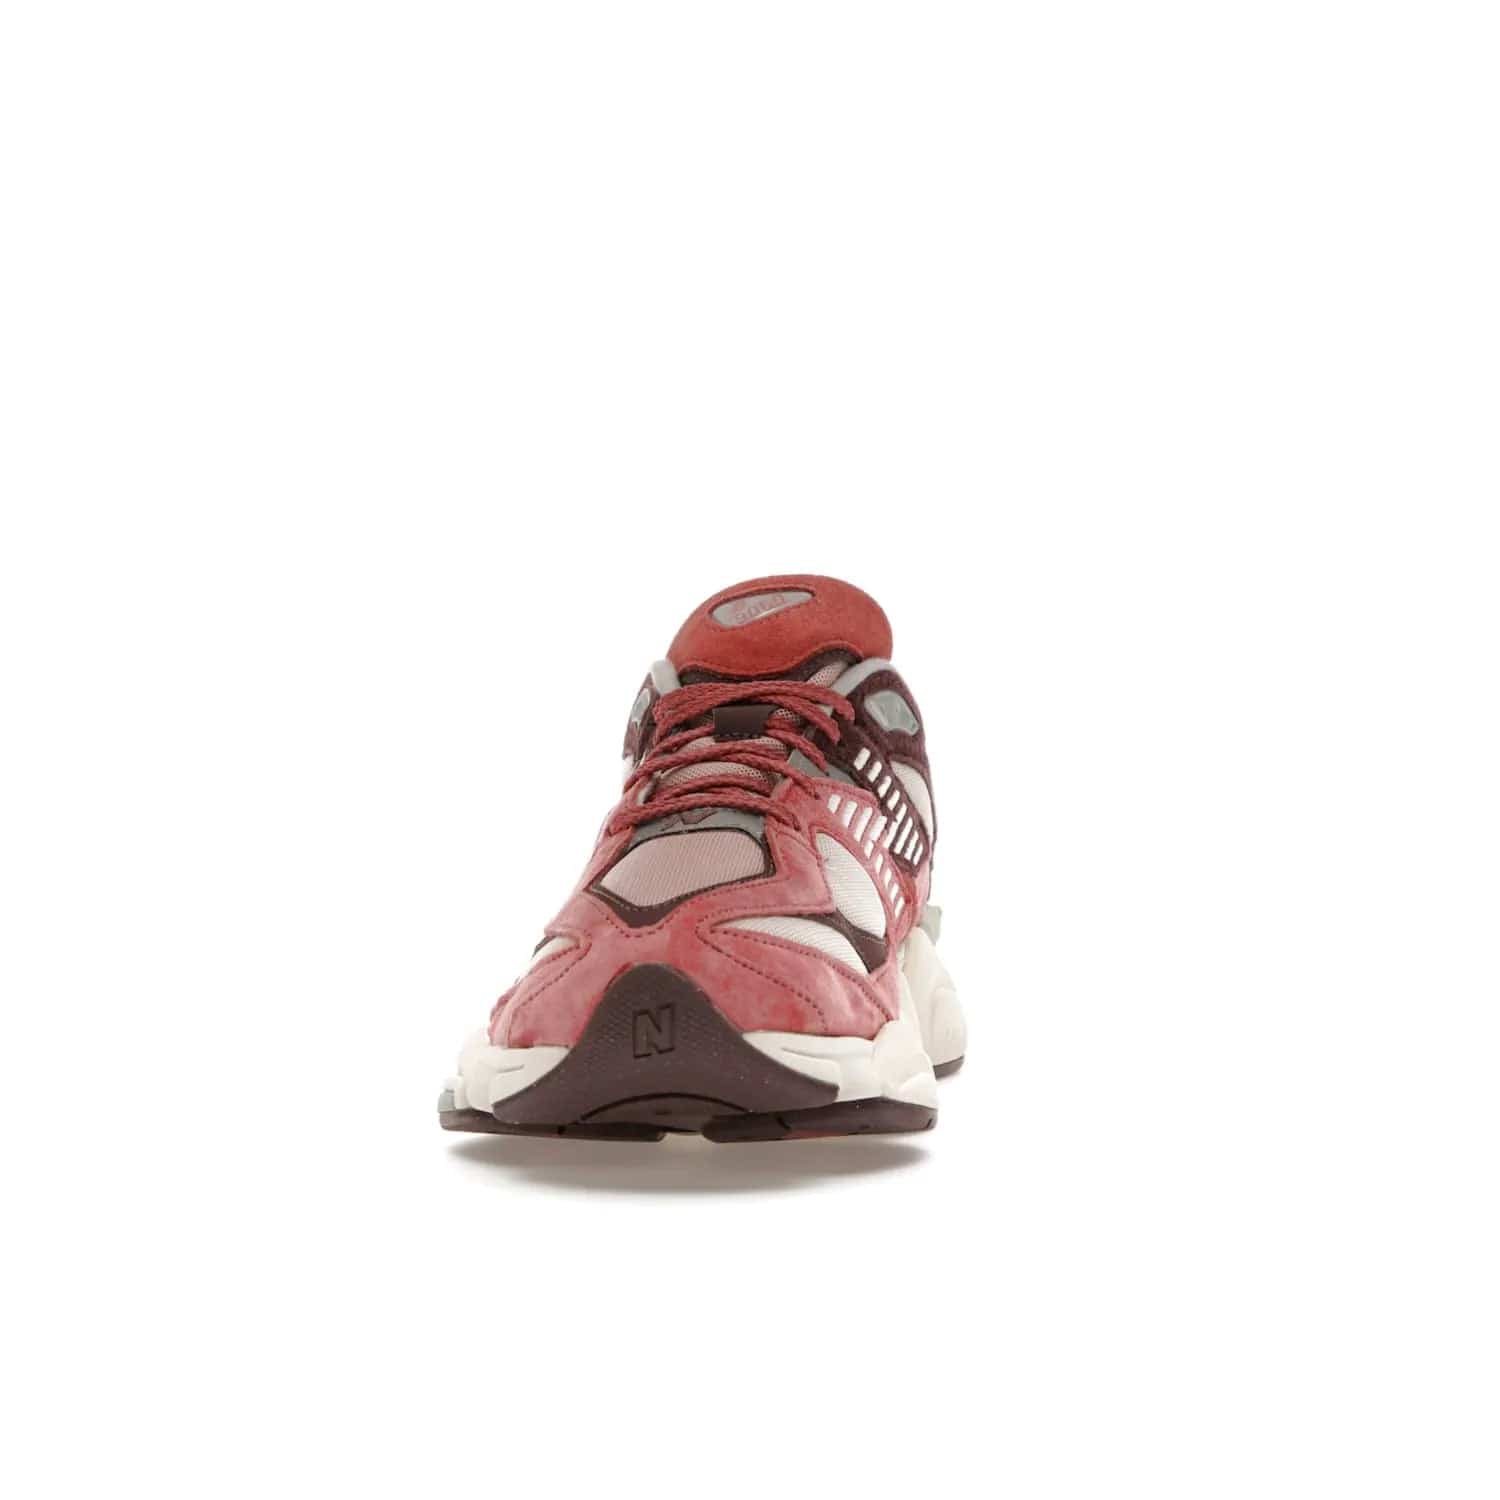 New Balance 9060 Cherry Blossom - Image 11 - Only at www.BallersClubKickz.com - The New Balance 9060 Cherry Blossom: Mineral Red, Truffle, and Rain Cloud tones with silver-tone N symbols, semi-transparent CR equipment, and more. Celebrate the cherry blossom festival in style - released March 4th, 2023.